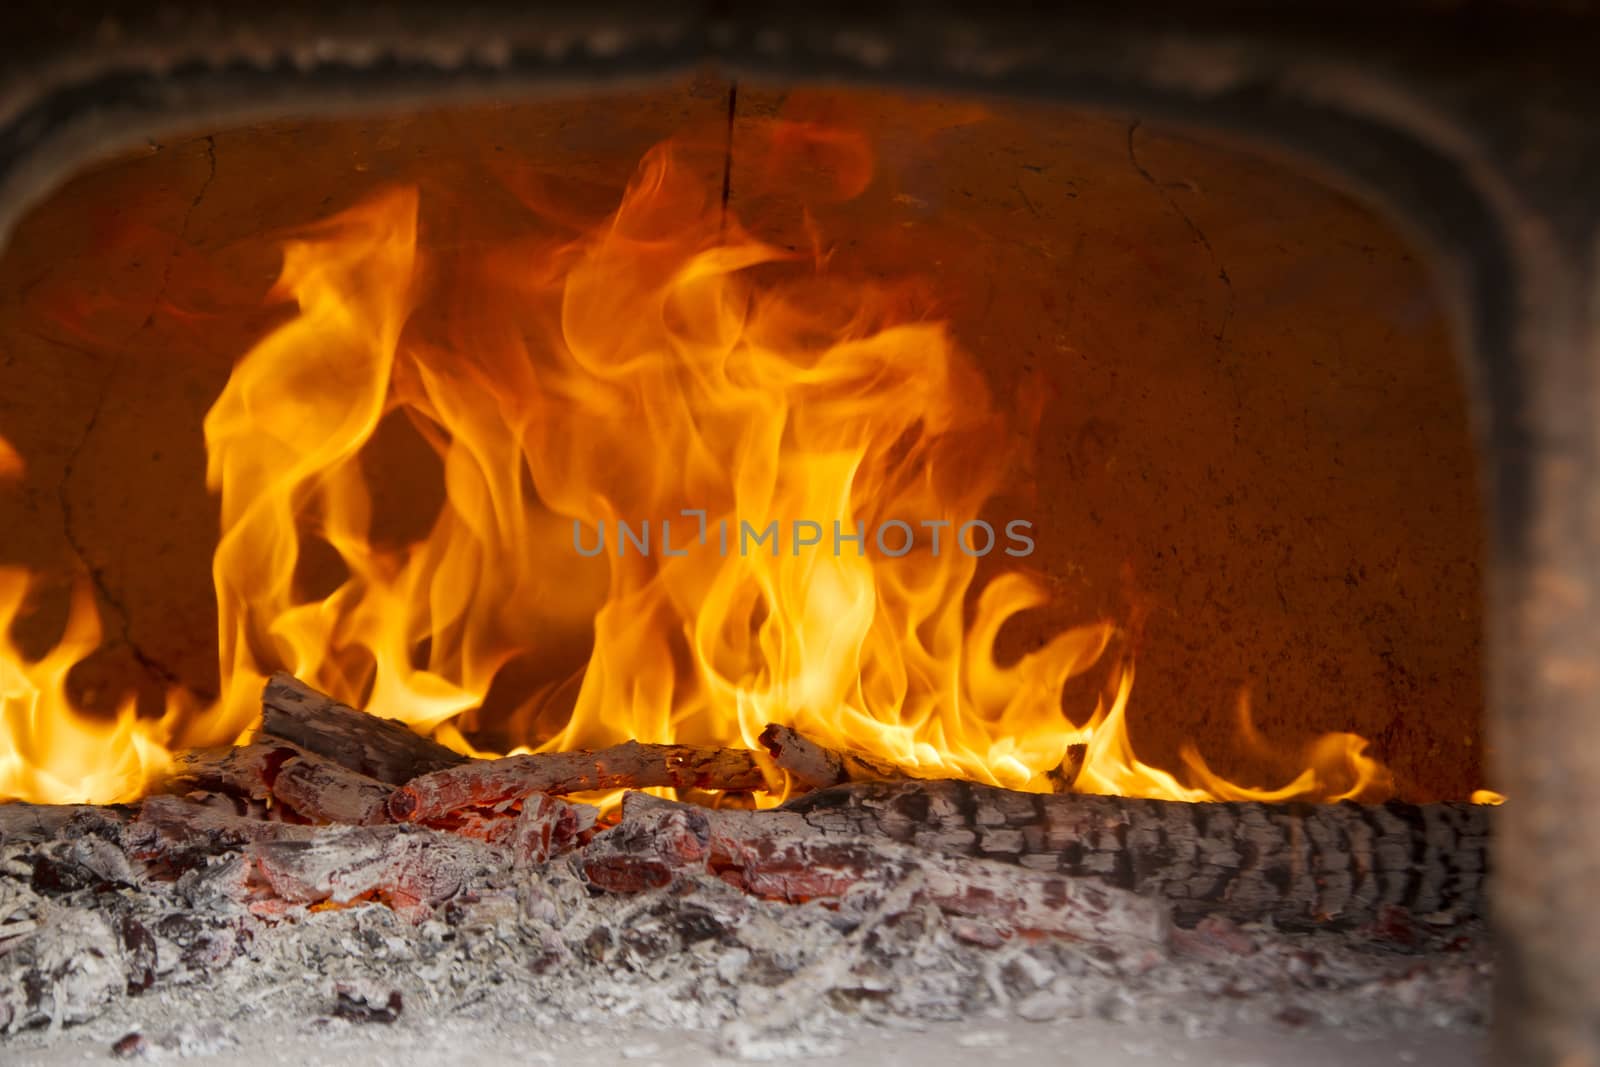 Preparation and heating of the oven for cooking food